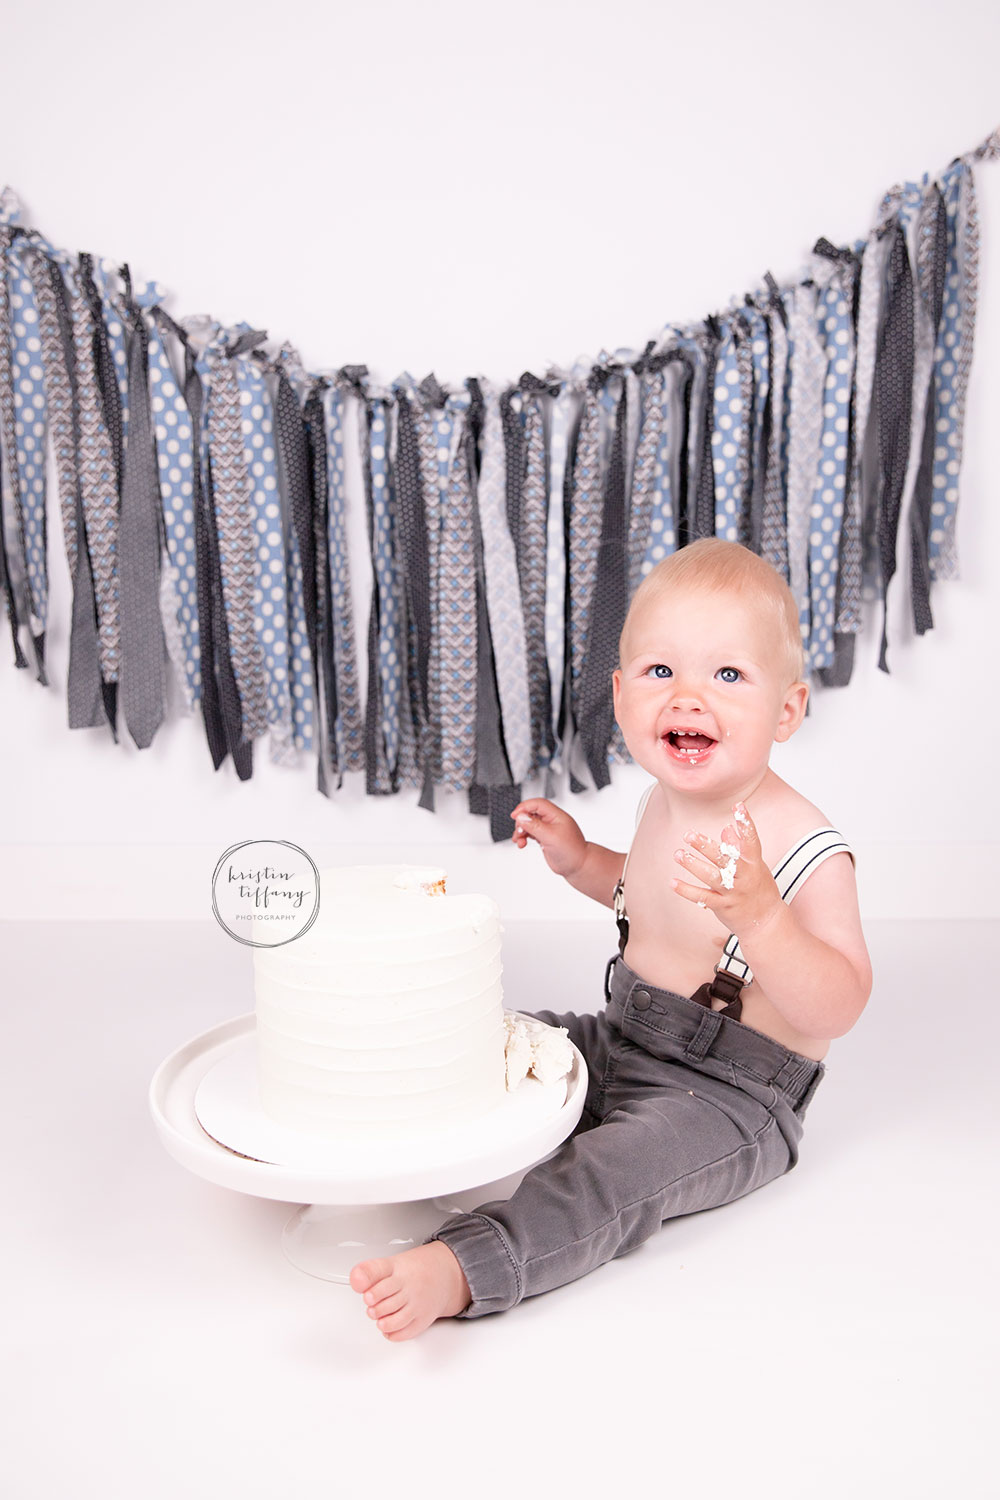 a photo of a baby boy at his cake smash photoshoot